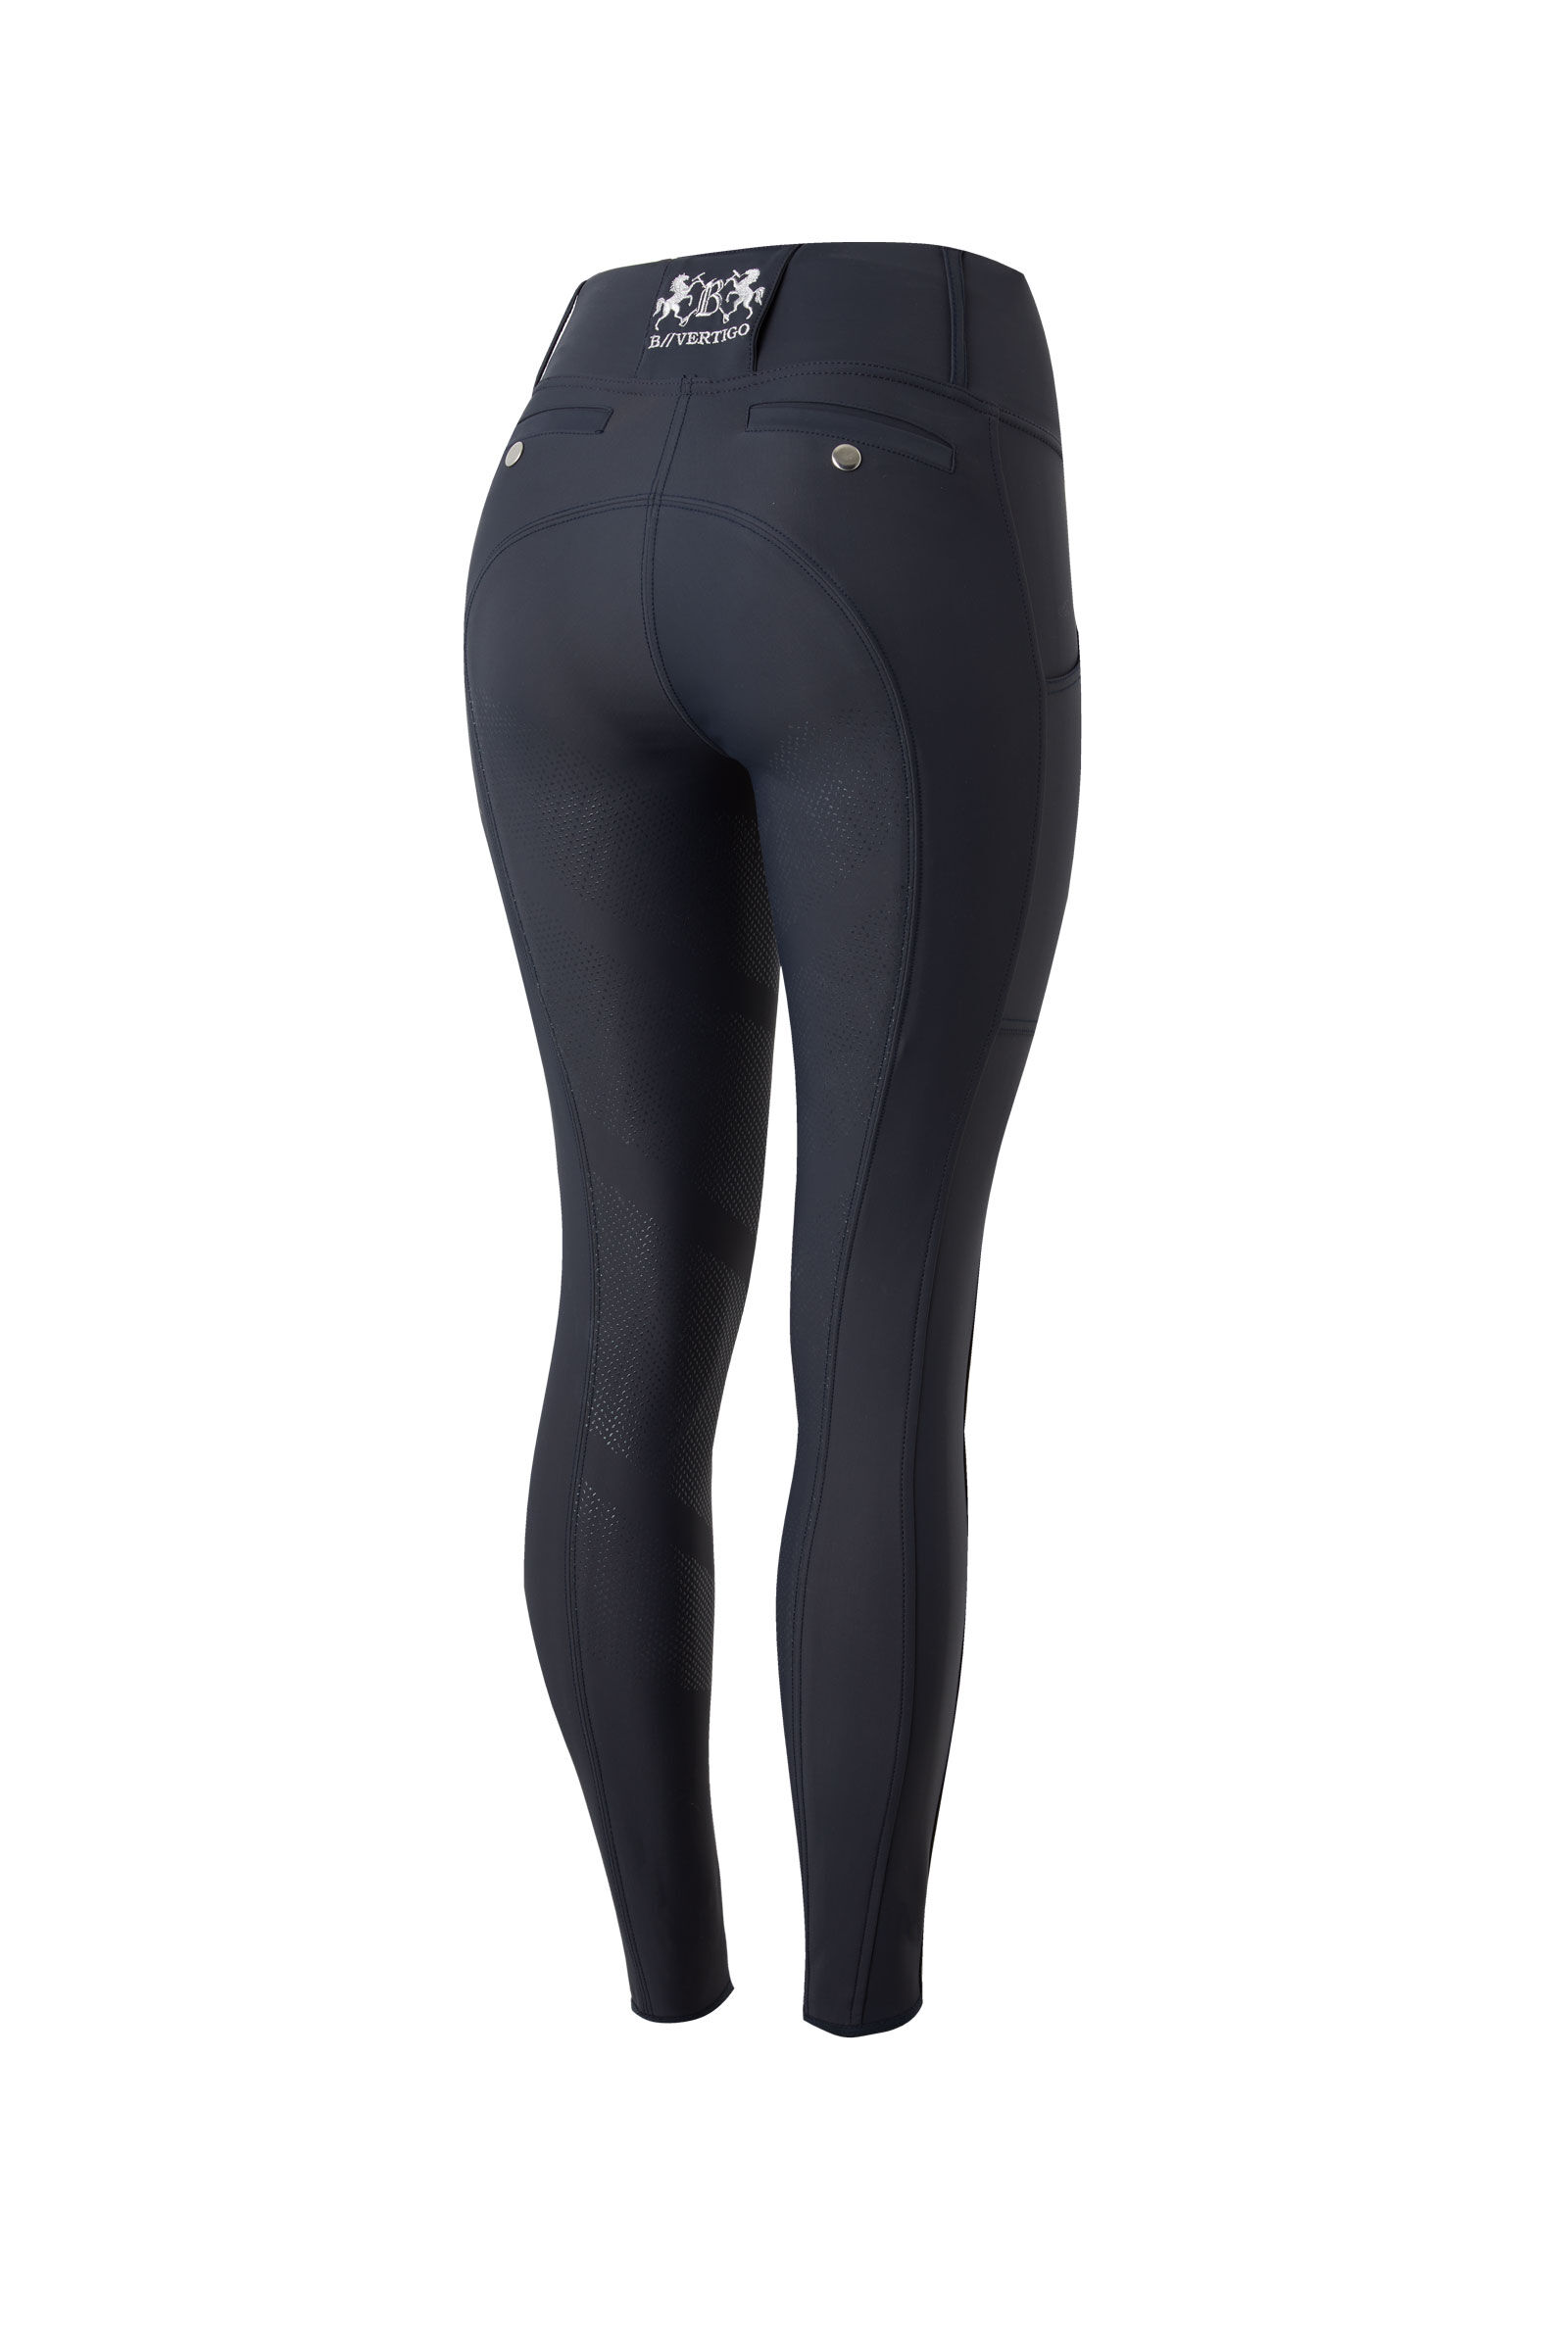 Shop Full Length Solid Leggings with Pockets and Belt Loops Online | Max  Bahrain